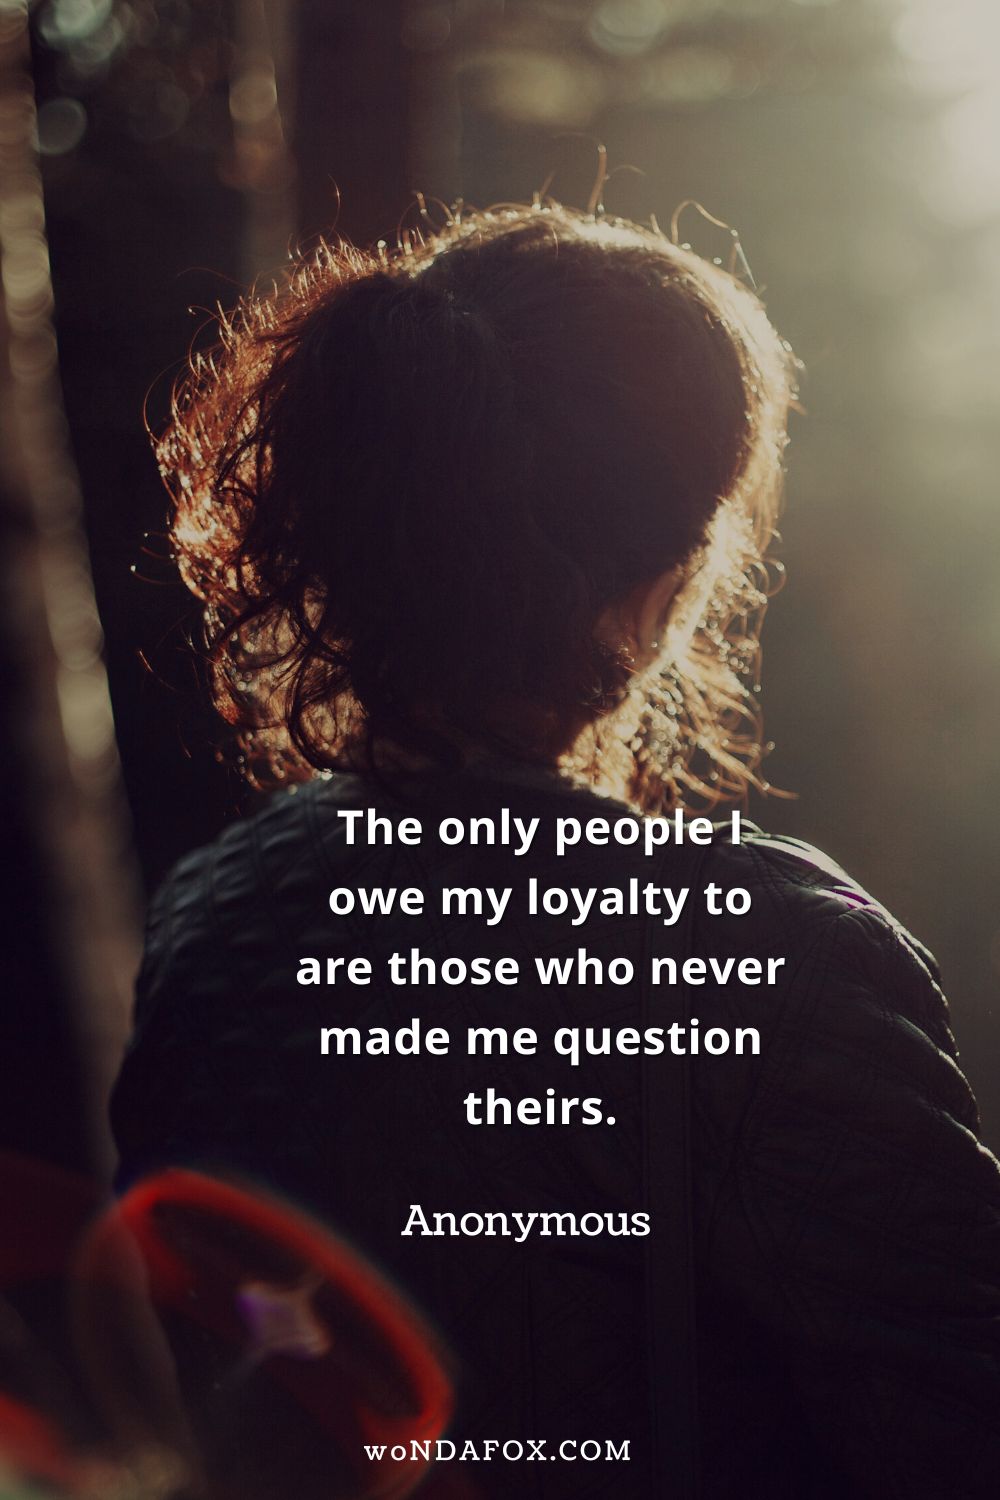 “The only people I owe my loyalty to are those who never made me question theirs.” 